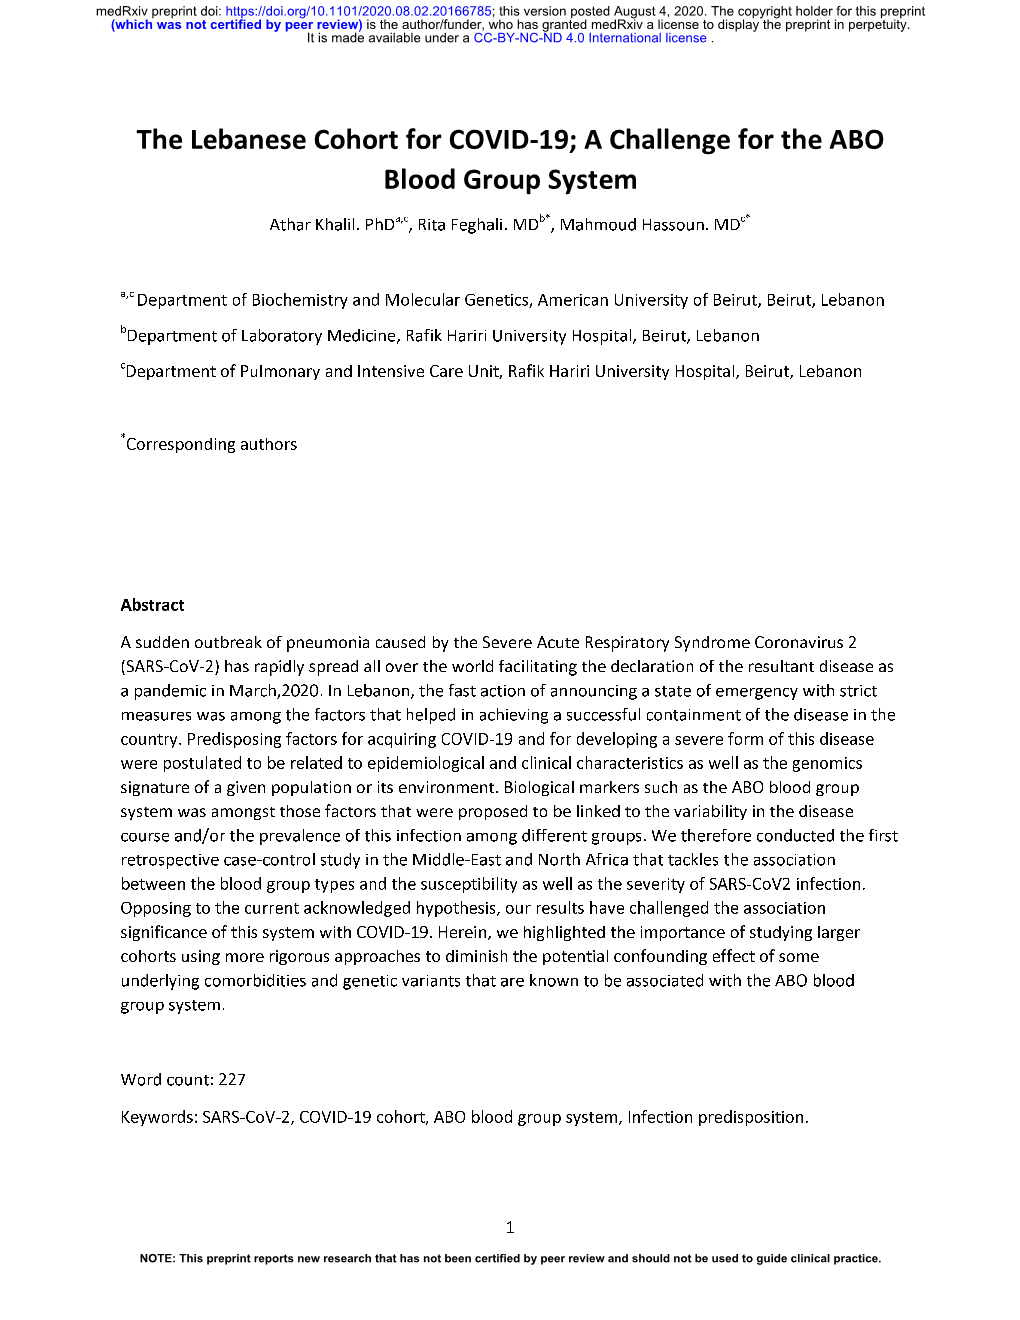 The Lebanese Cohort for COVID-19; a Challenge for the ABO Blood Group System